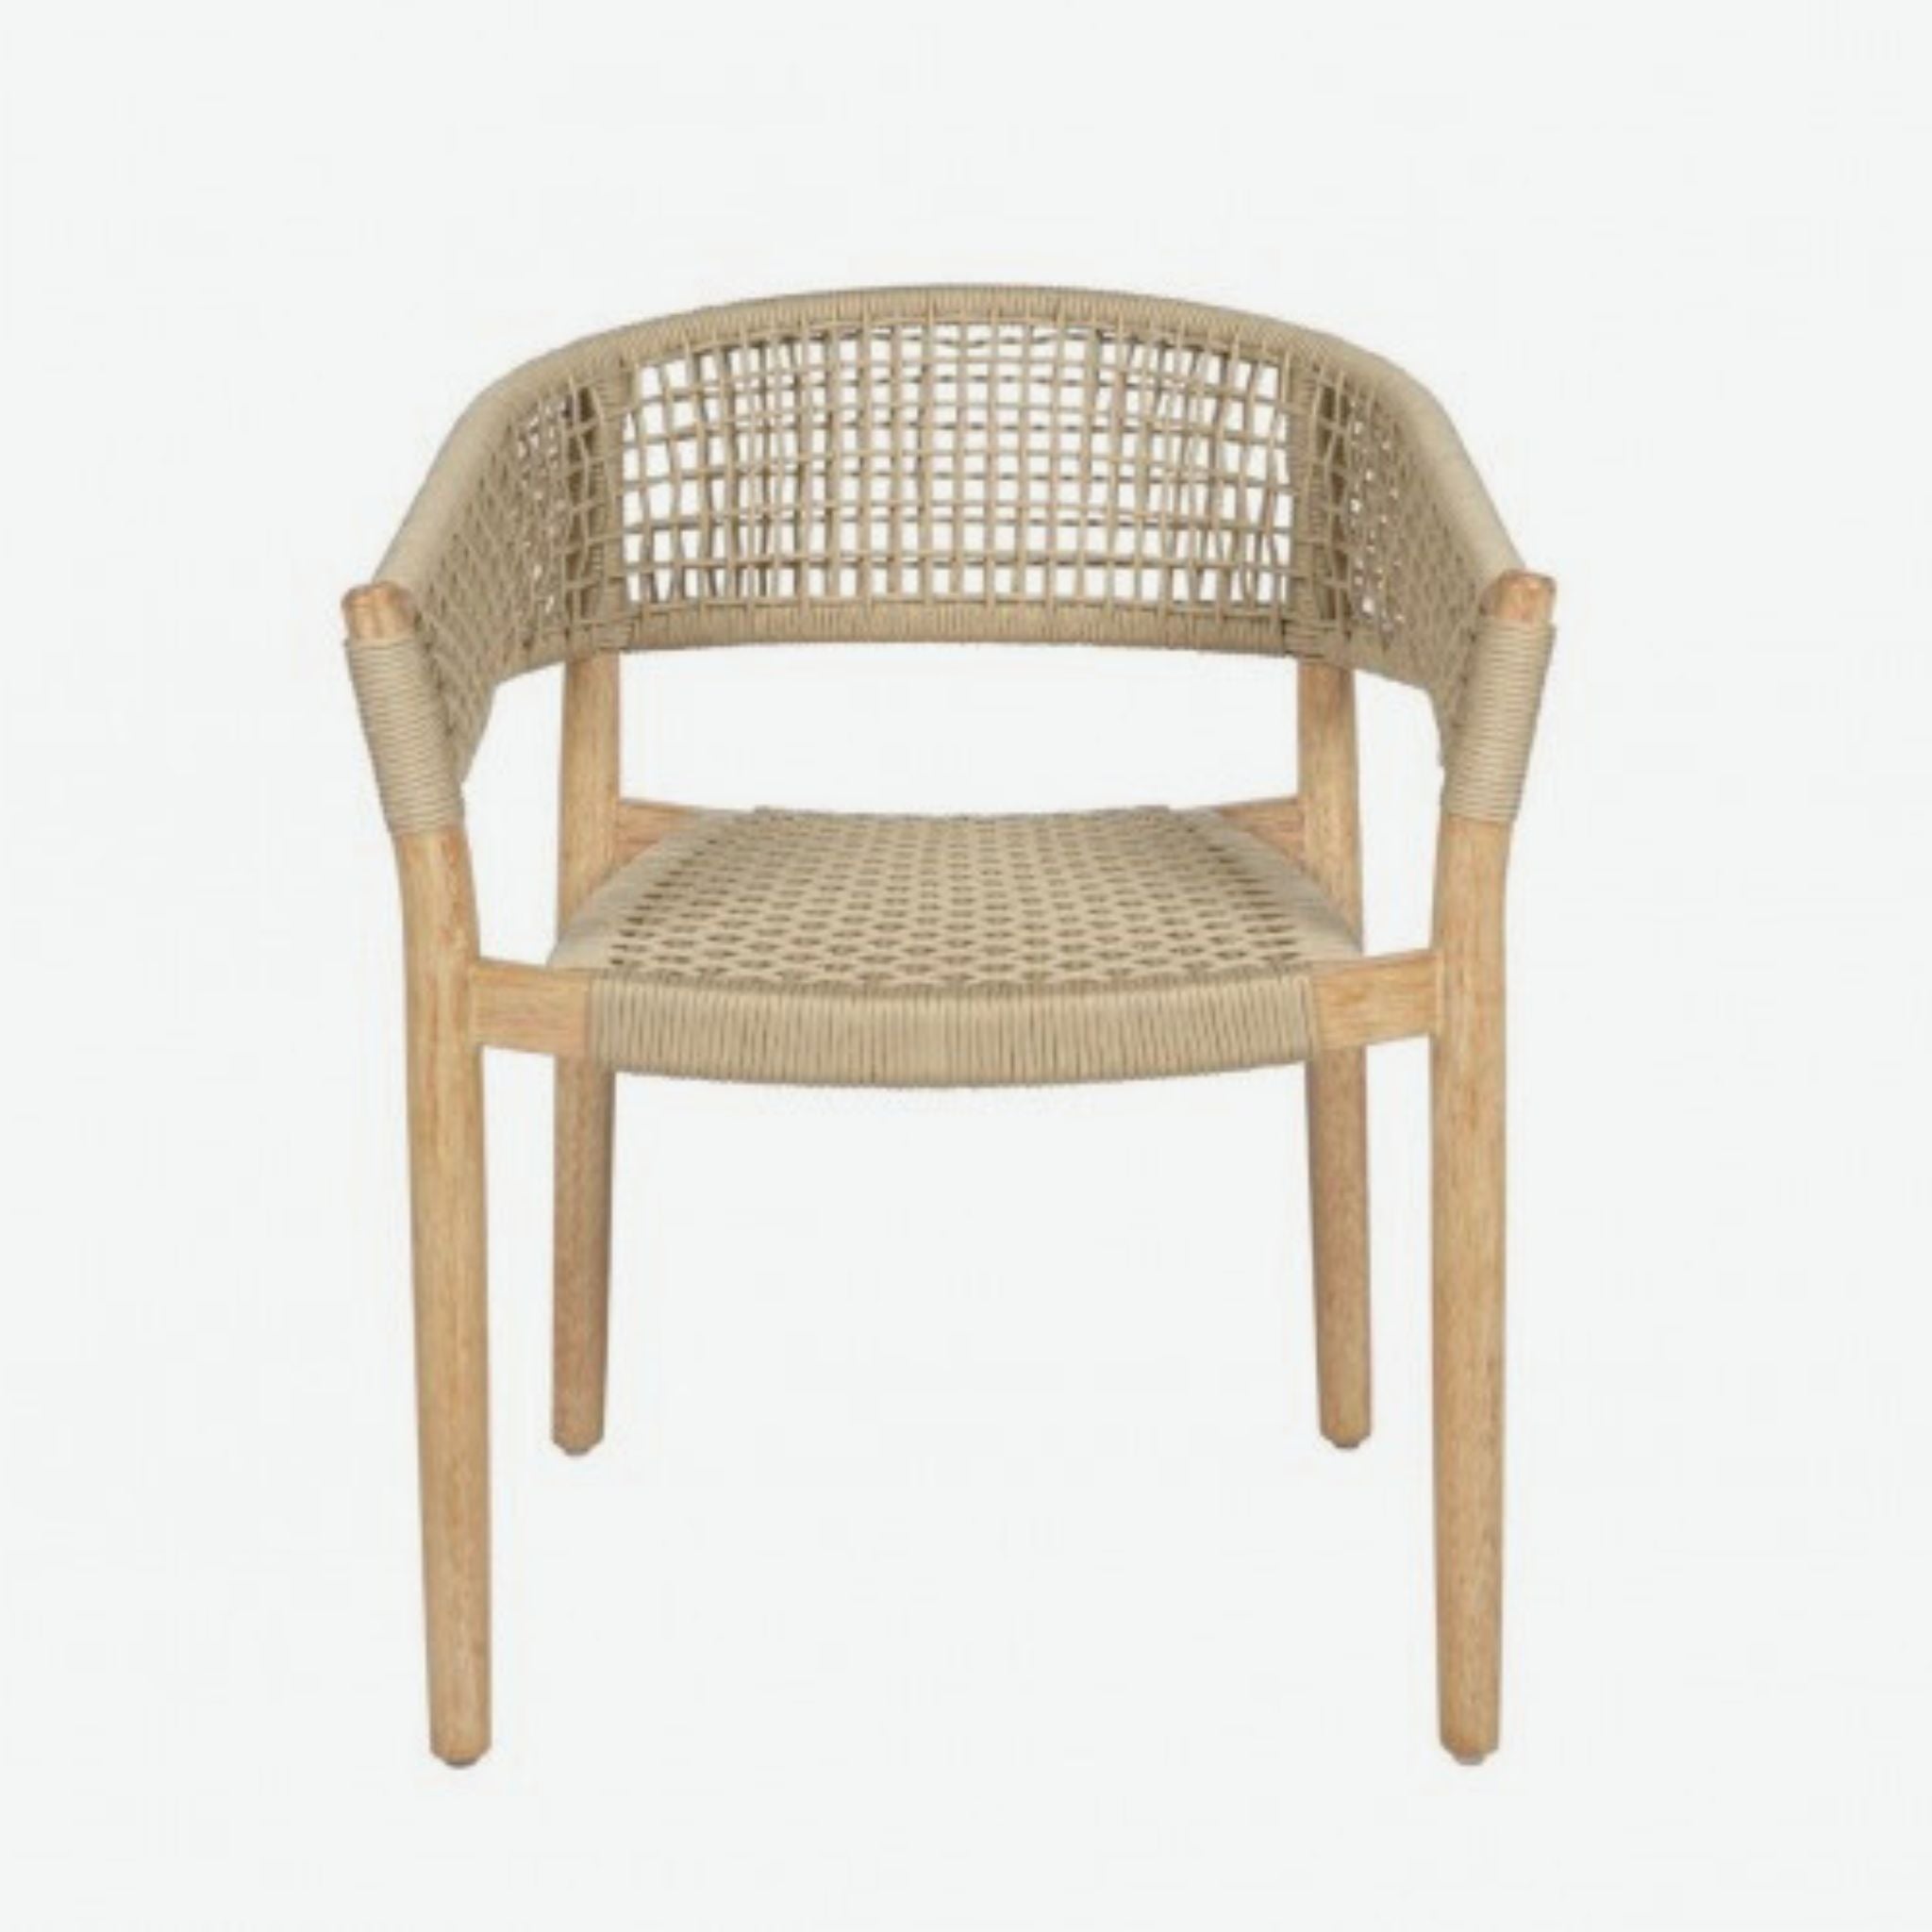 Crisal Decoracion Ibiza Outdoor Chair with Rounded Backrest Eucalyptus Wood and Sand Coloured Rope Set of 2 - ModernistaLiving